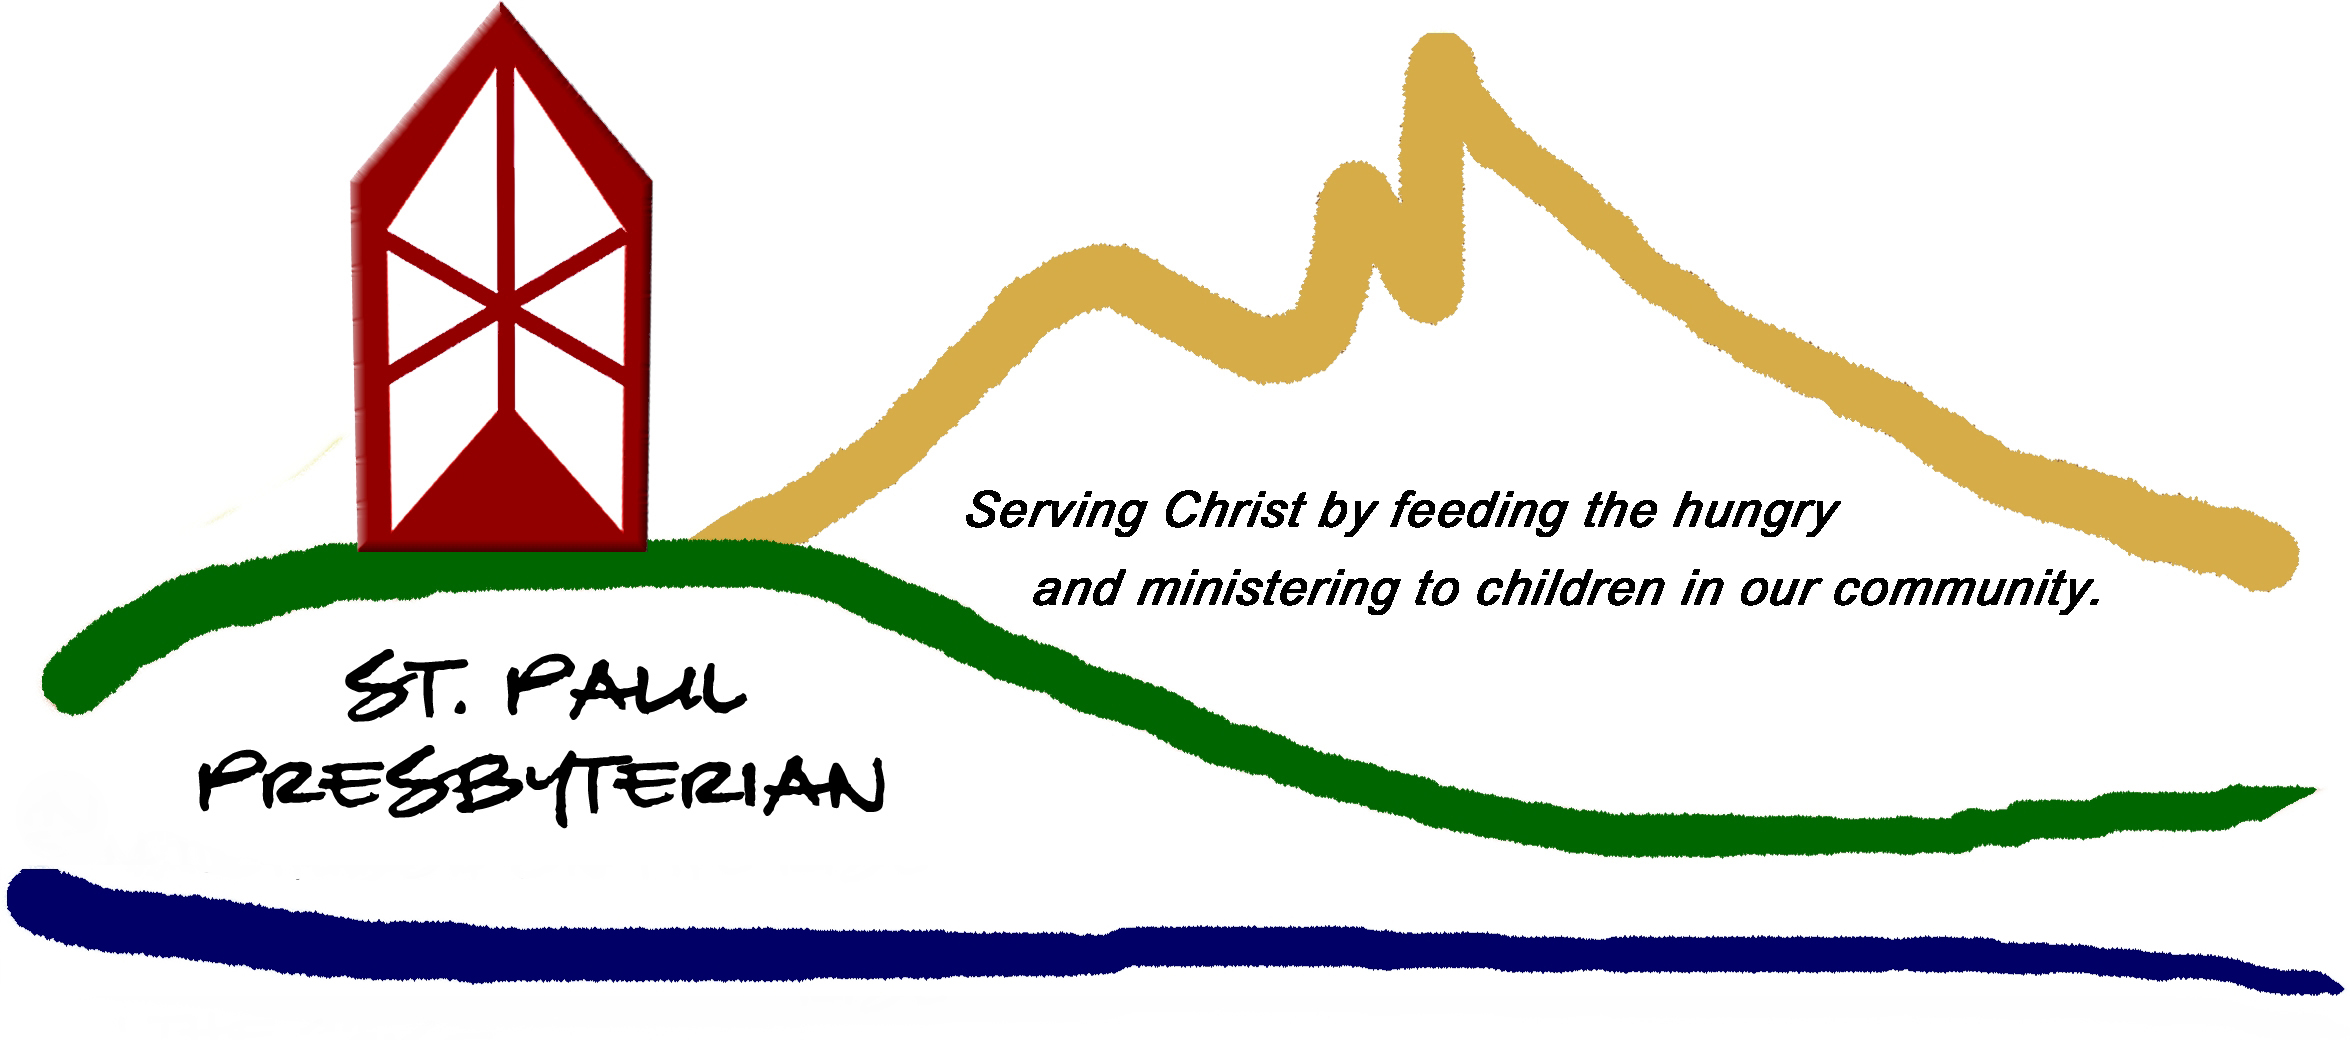 Feeding Christ by feeding the hungry and ministering to children in our community.